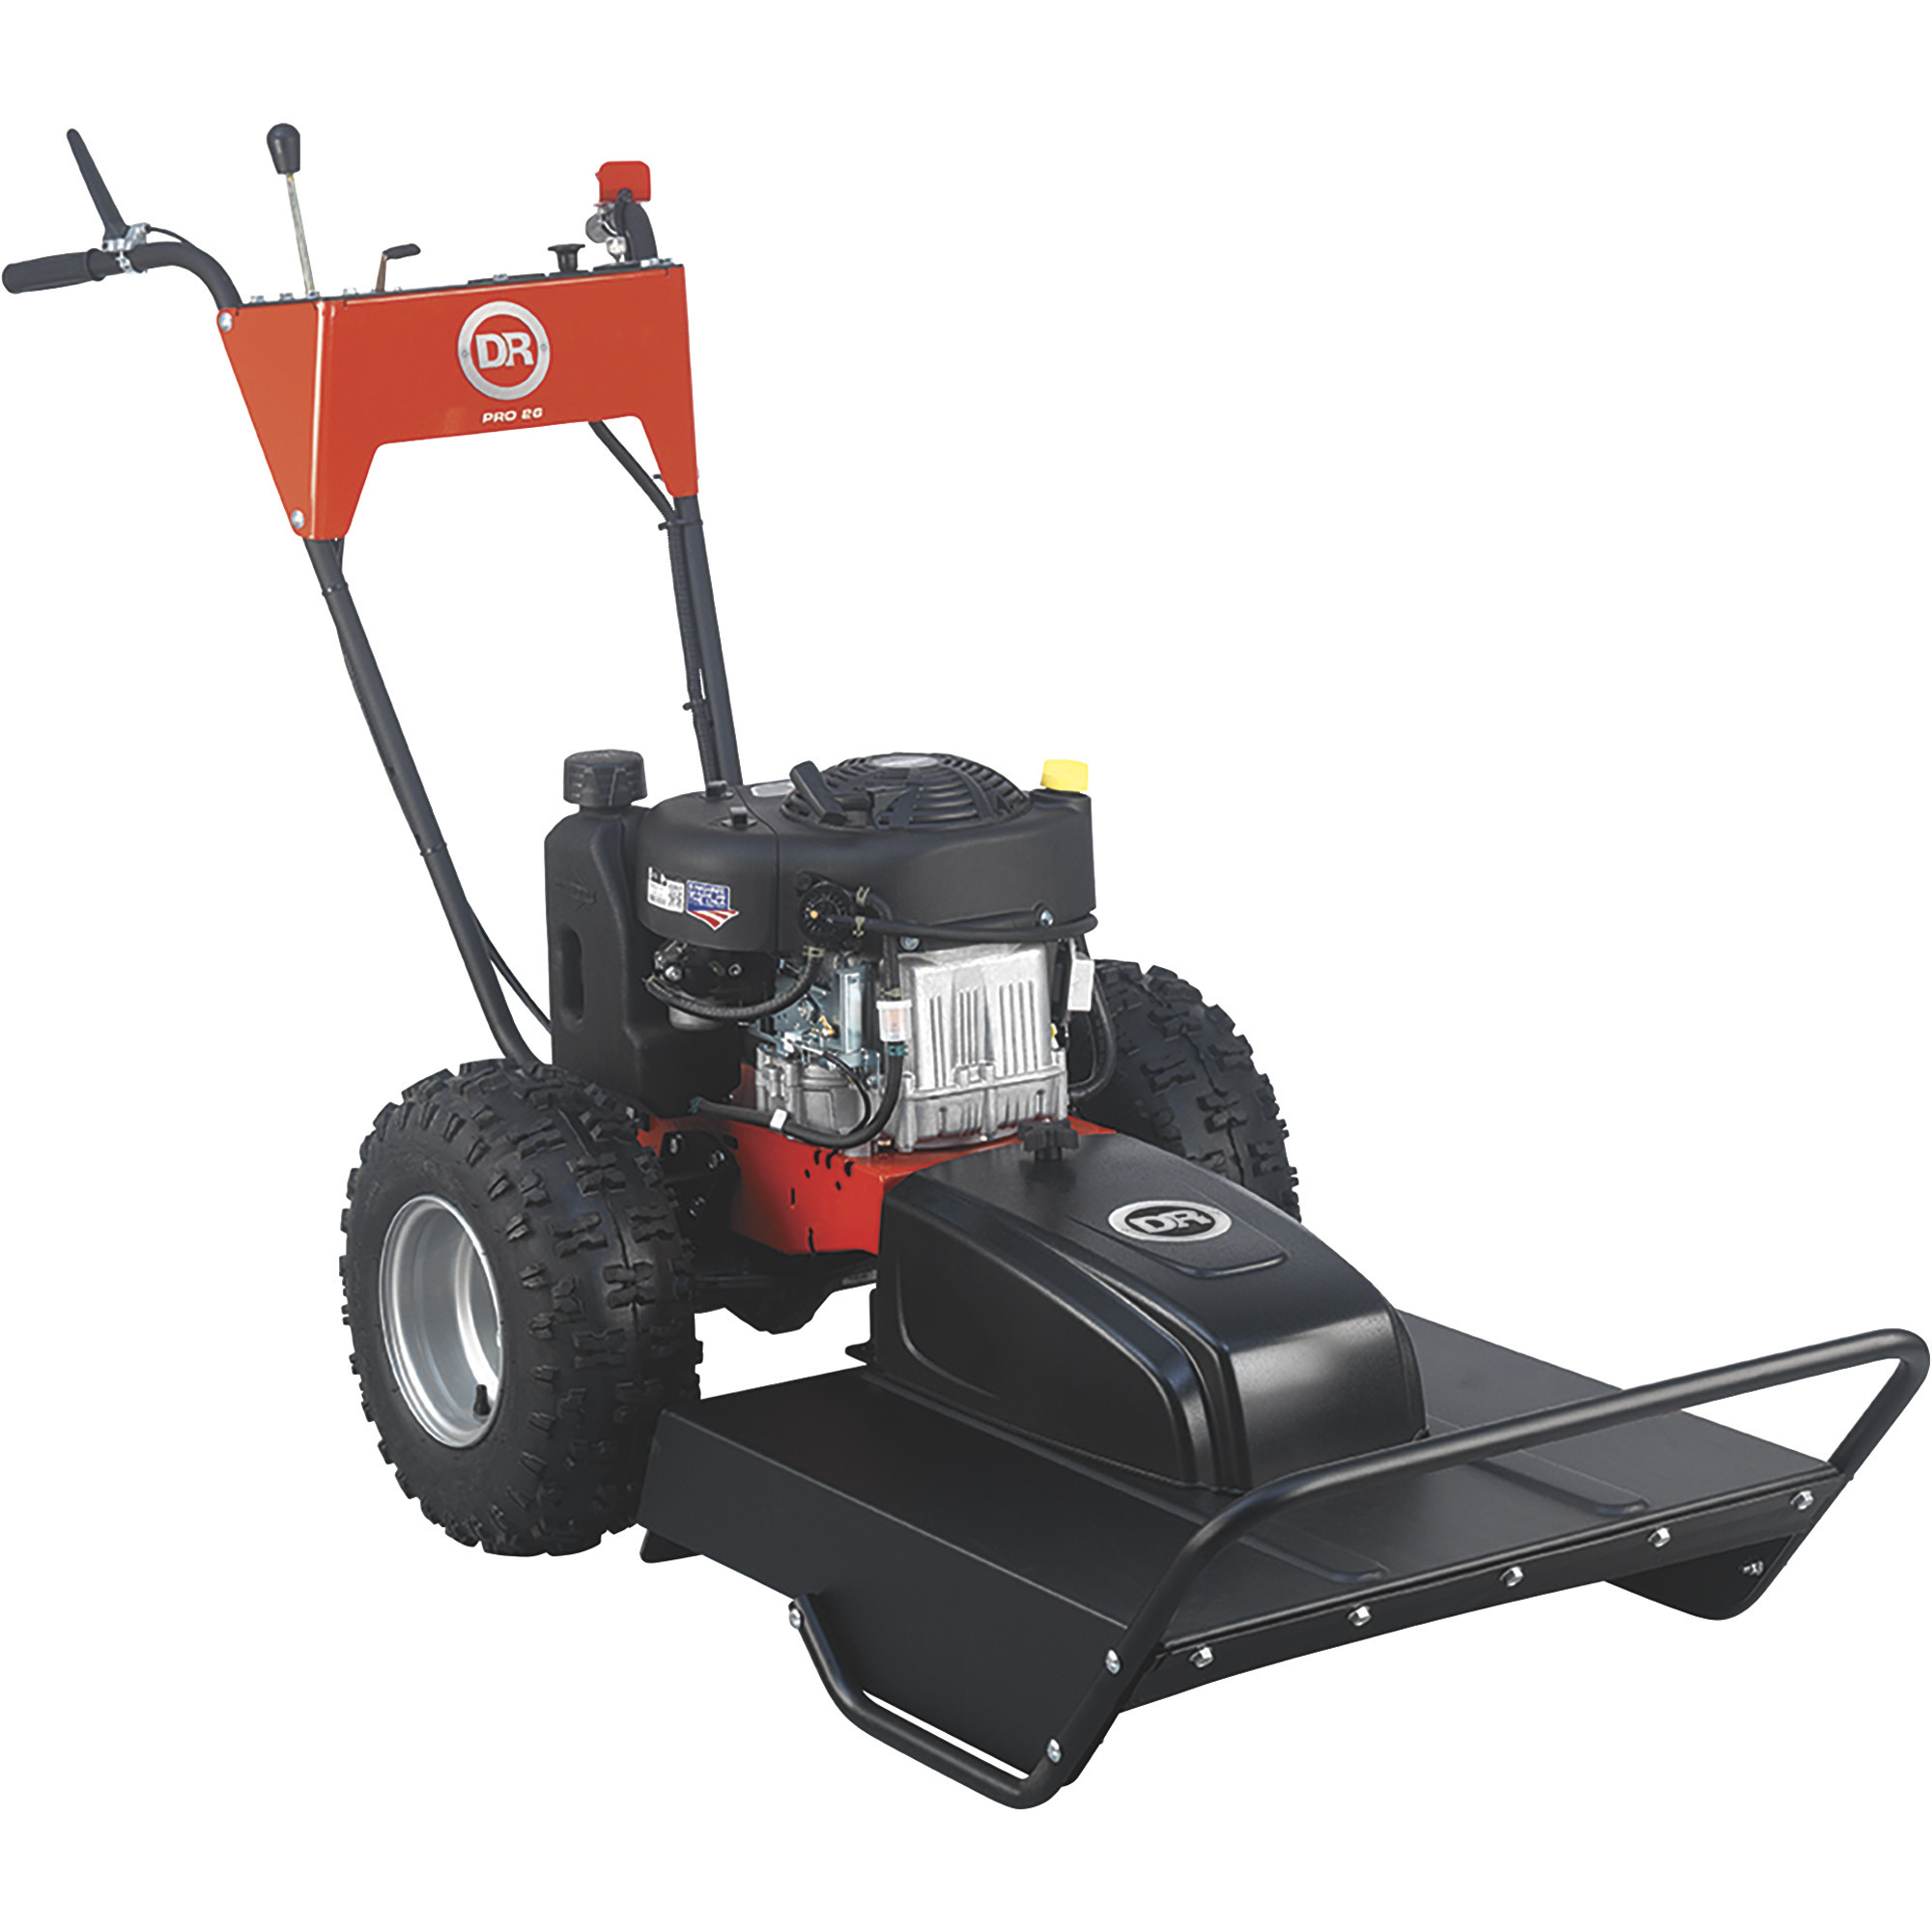 DR Power PRO Field and Brush Mower, 10.5 HP, 26Inch Pivoting Deck, Model AT43026BMN